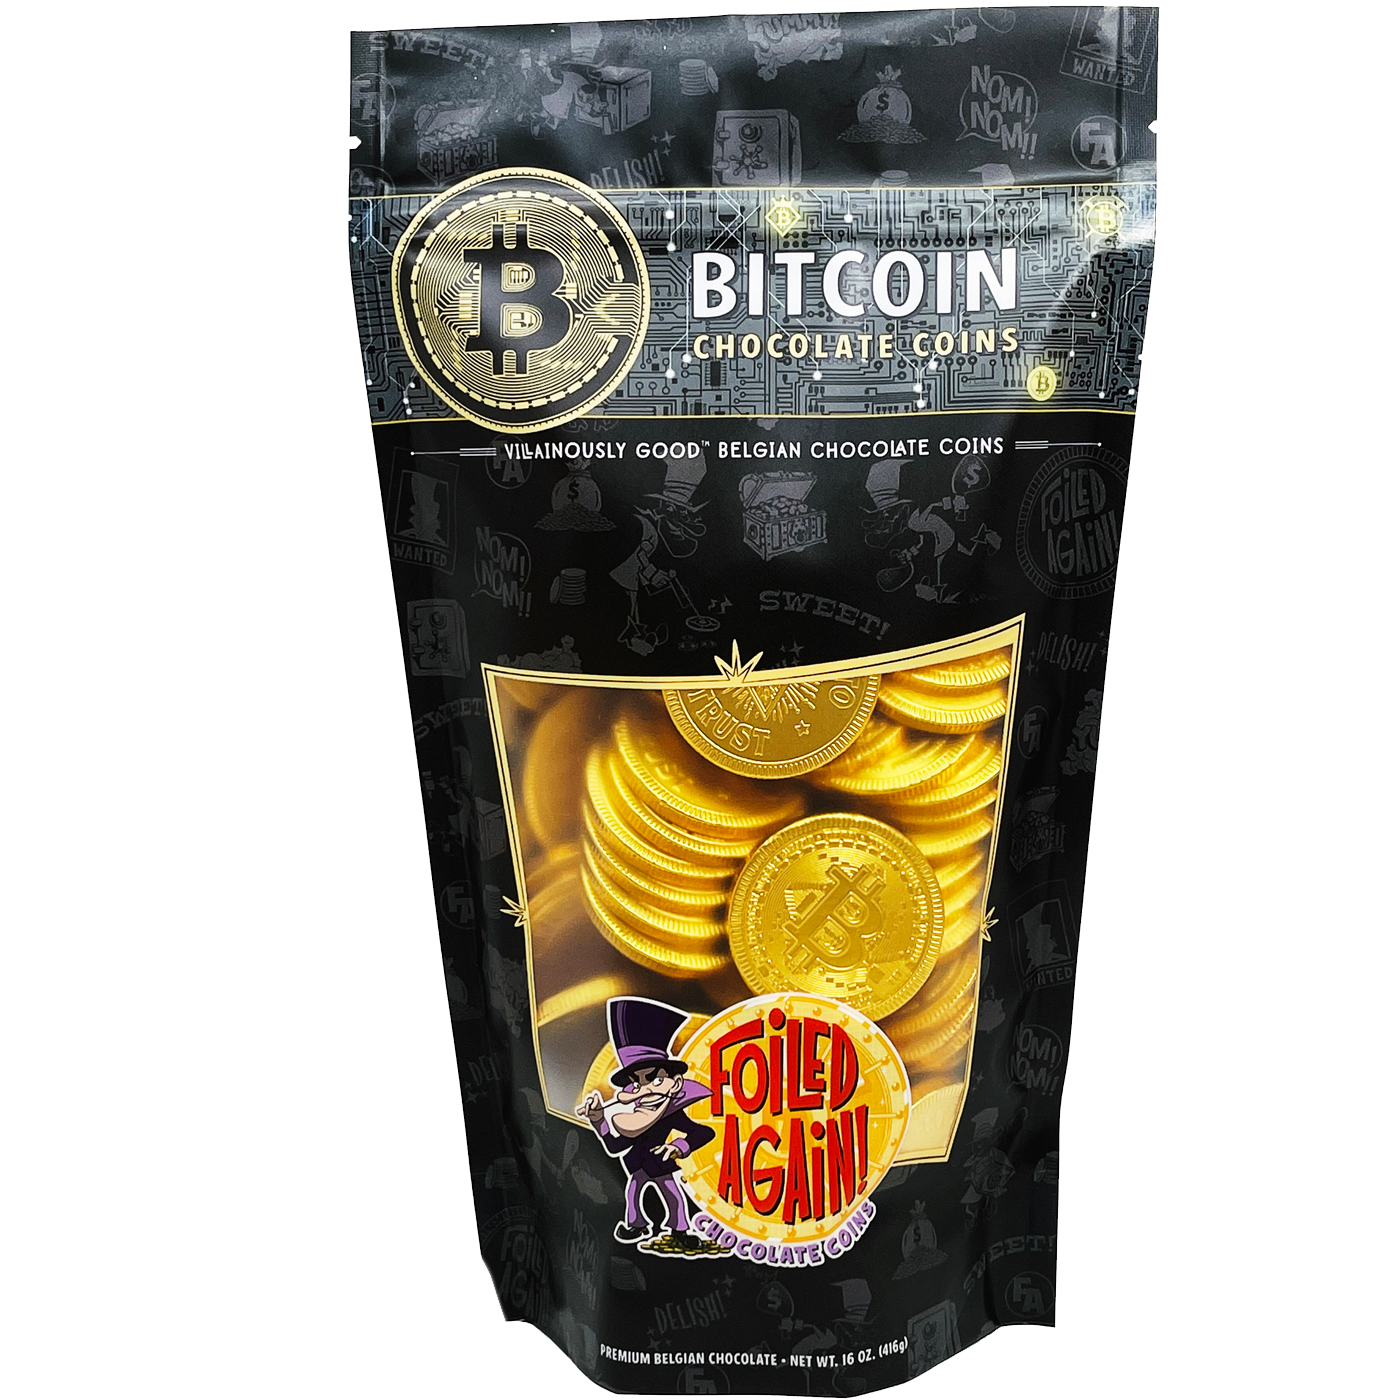 Bitcoin Candy Royalty-Free Images, Stock Photos & Pictures | Shutterstock